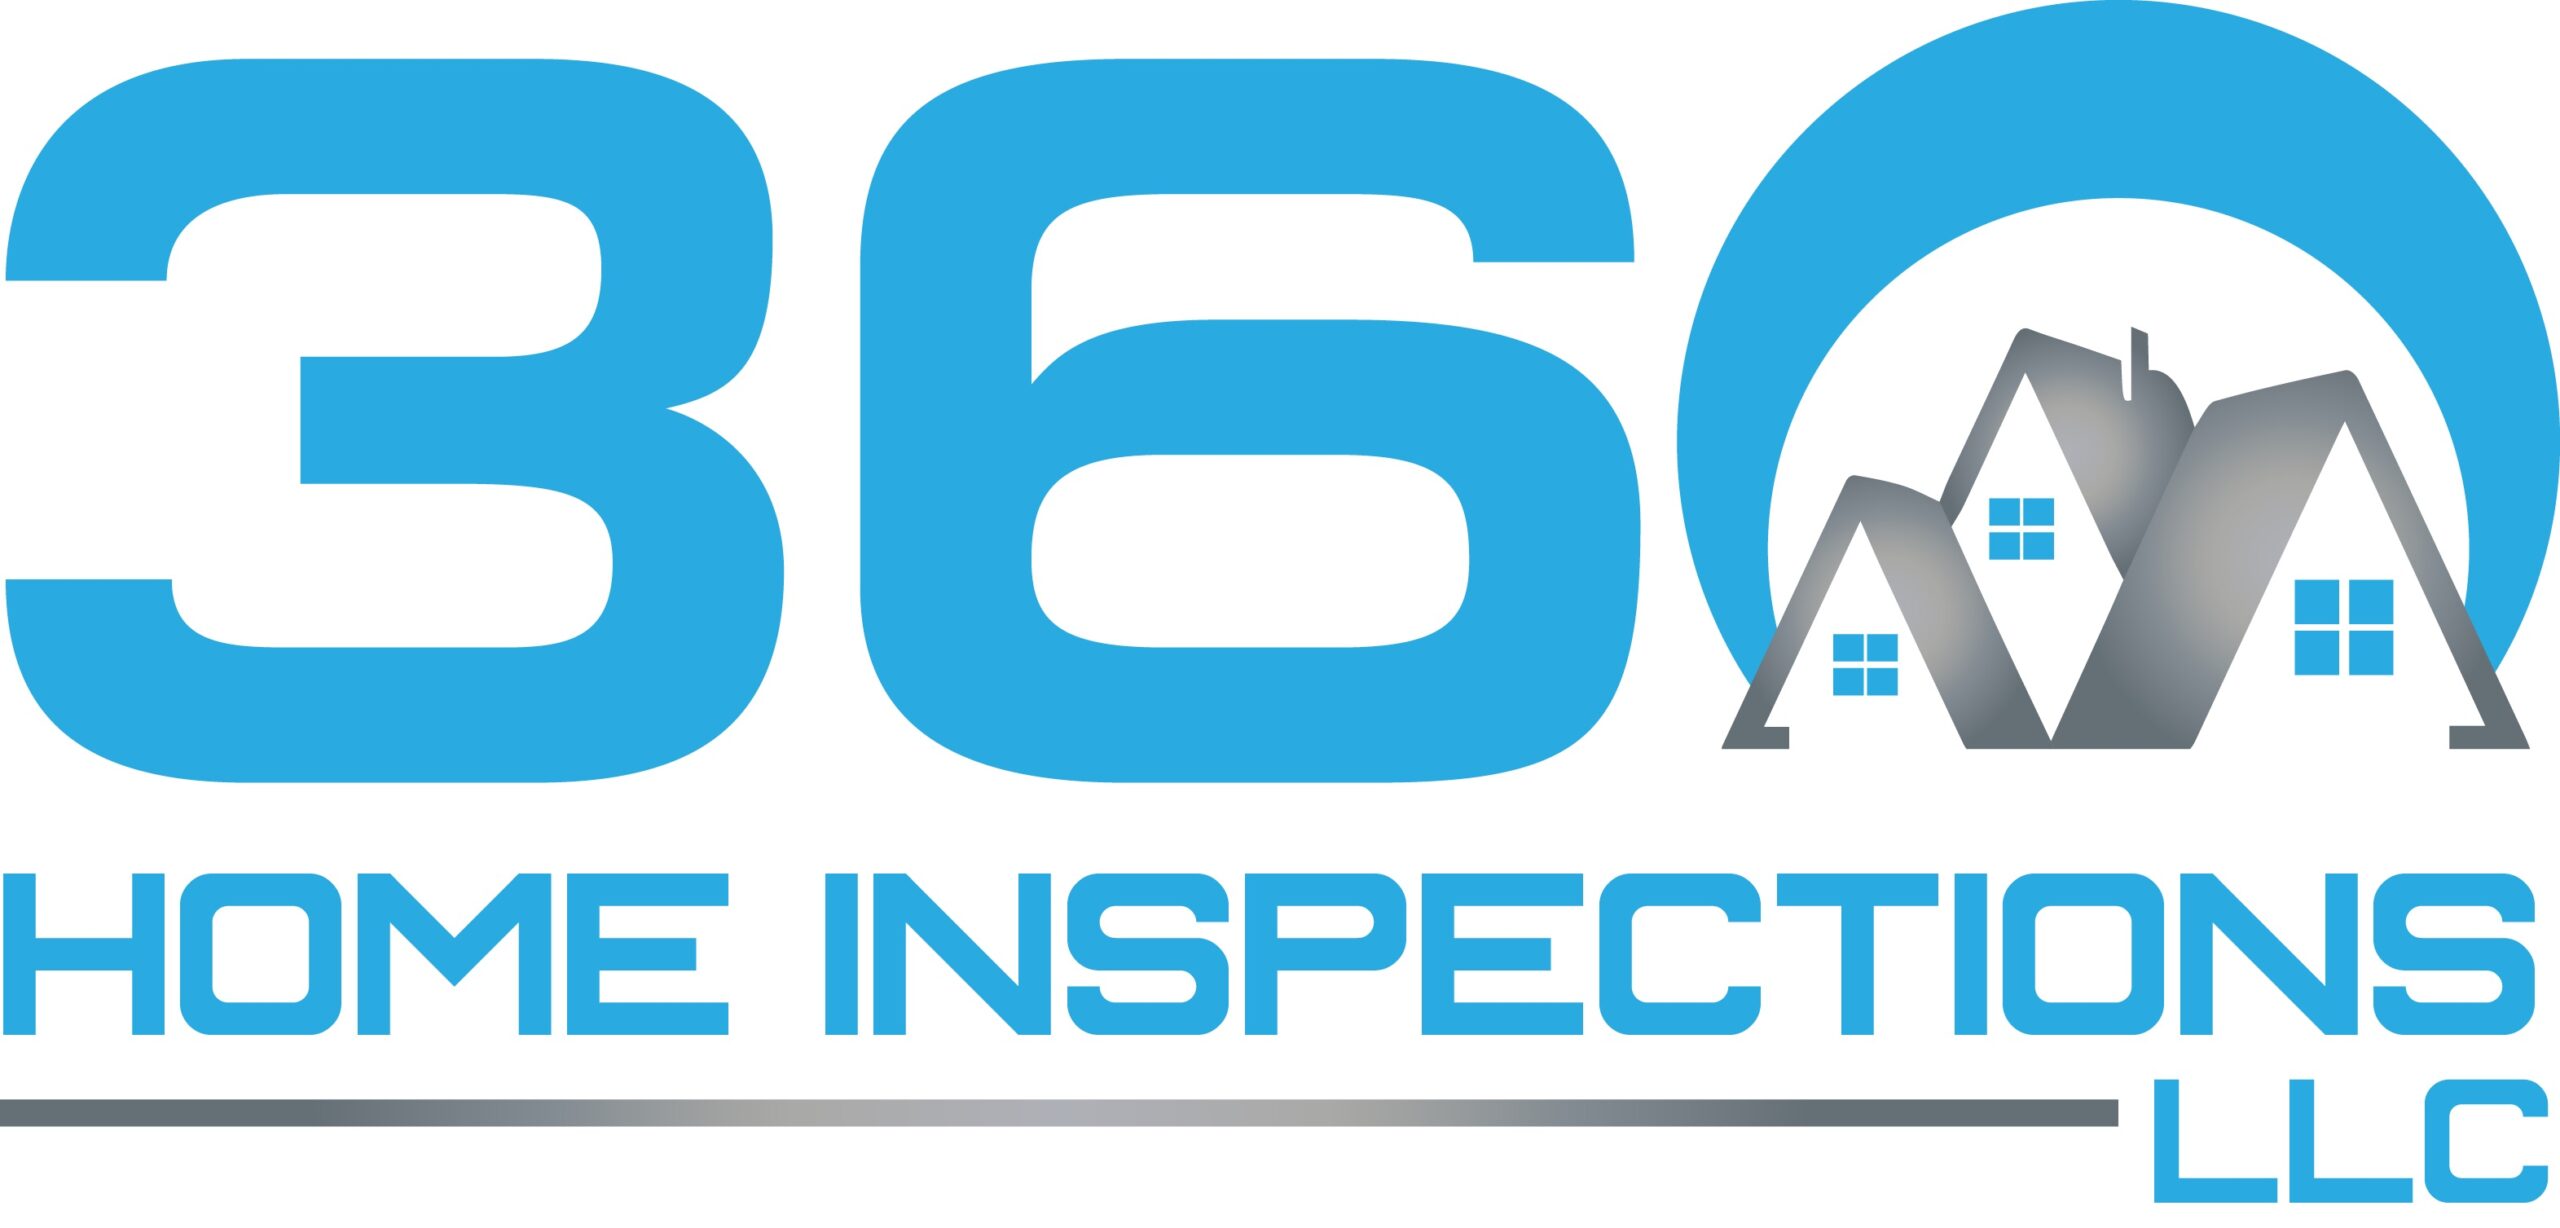 360 home inspection